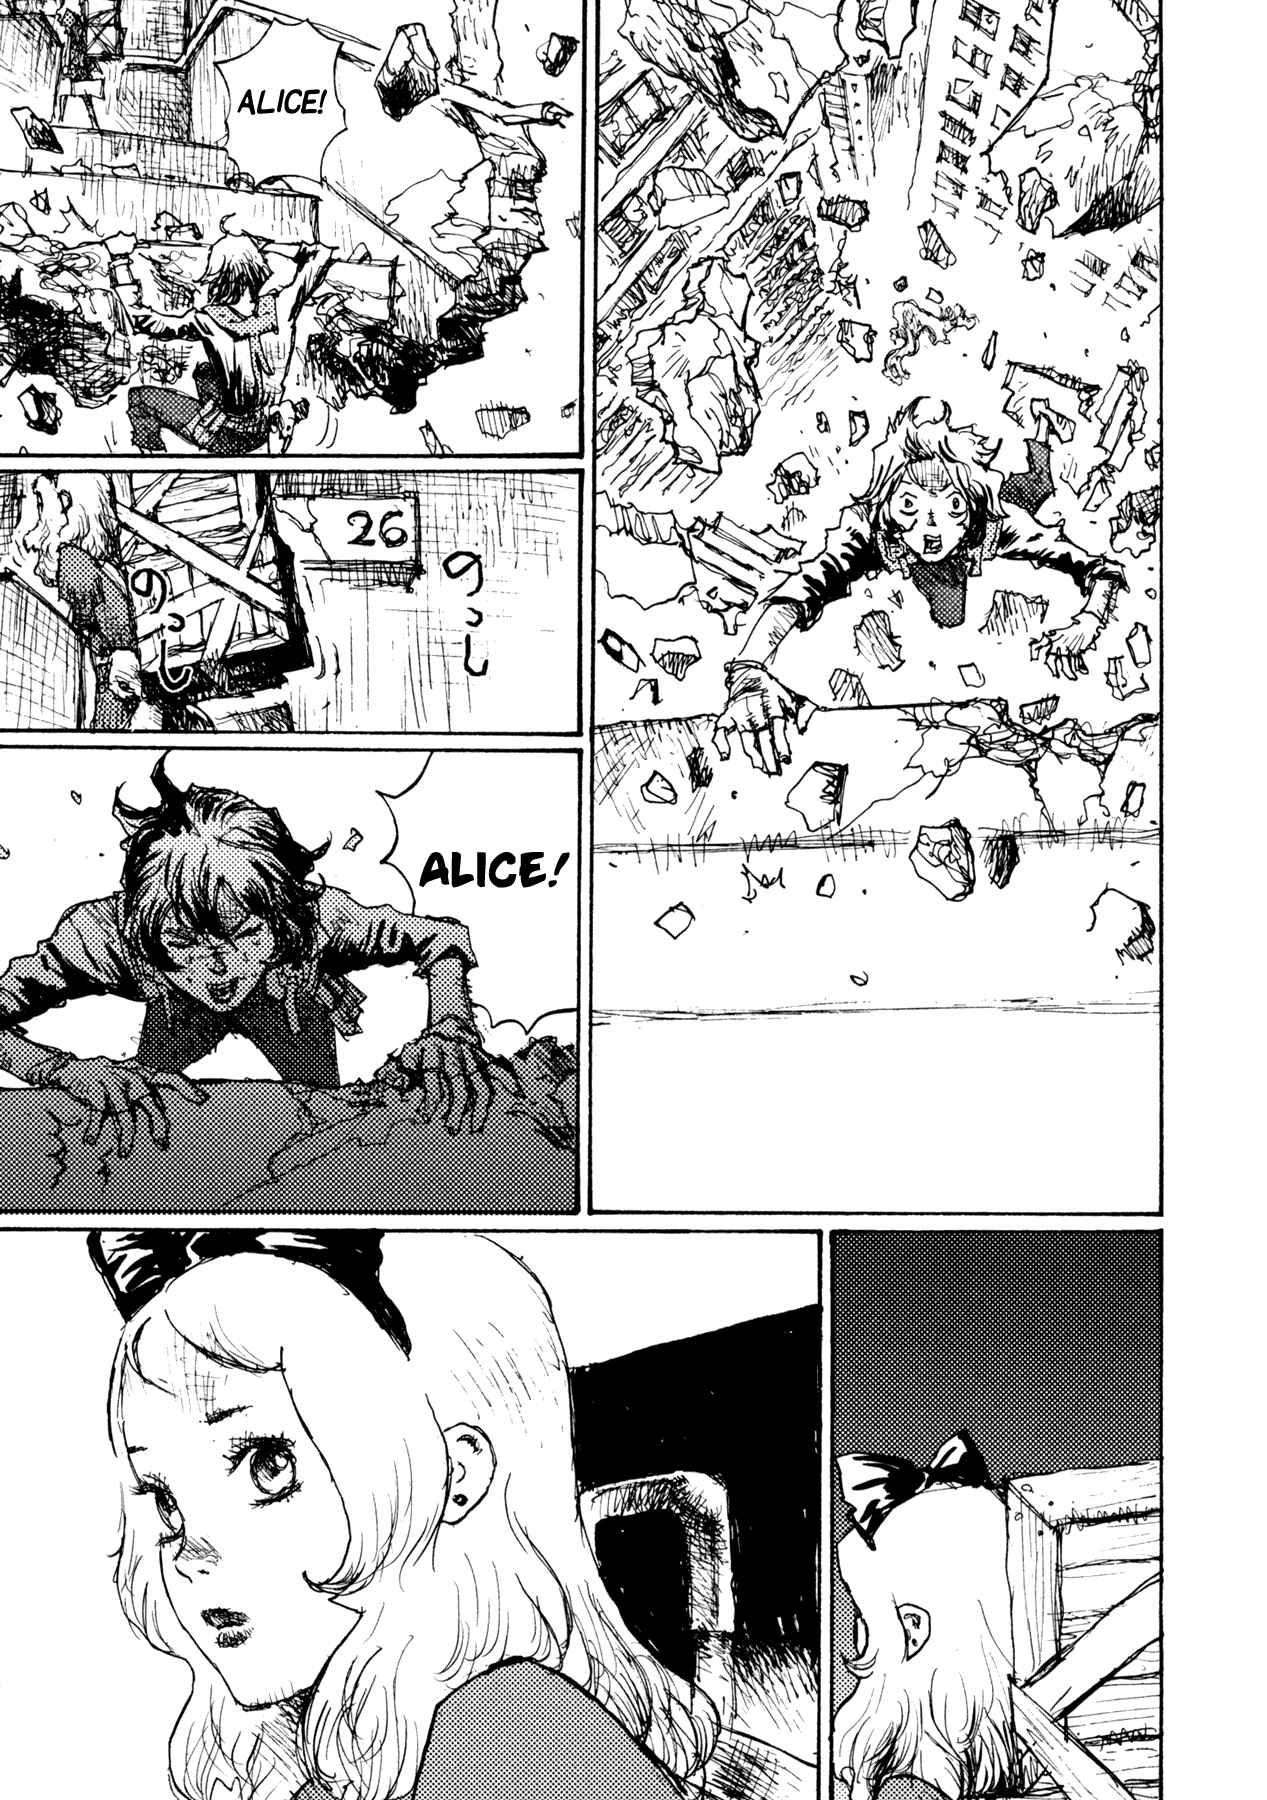 Alice from Hell Vol. 1 Ch. 2 Scoundrels Vanished